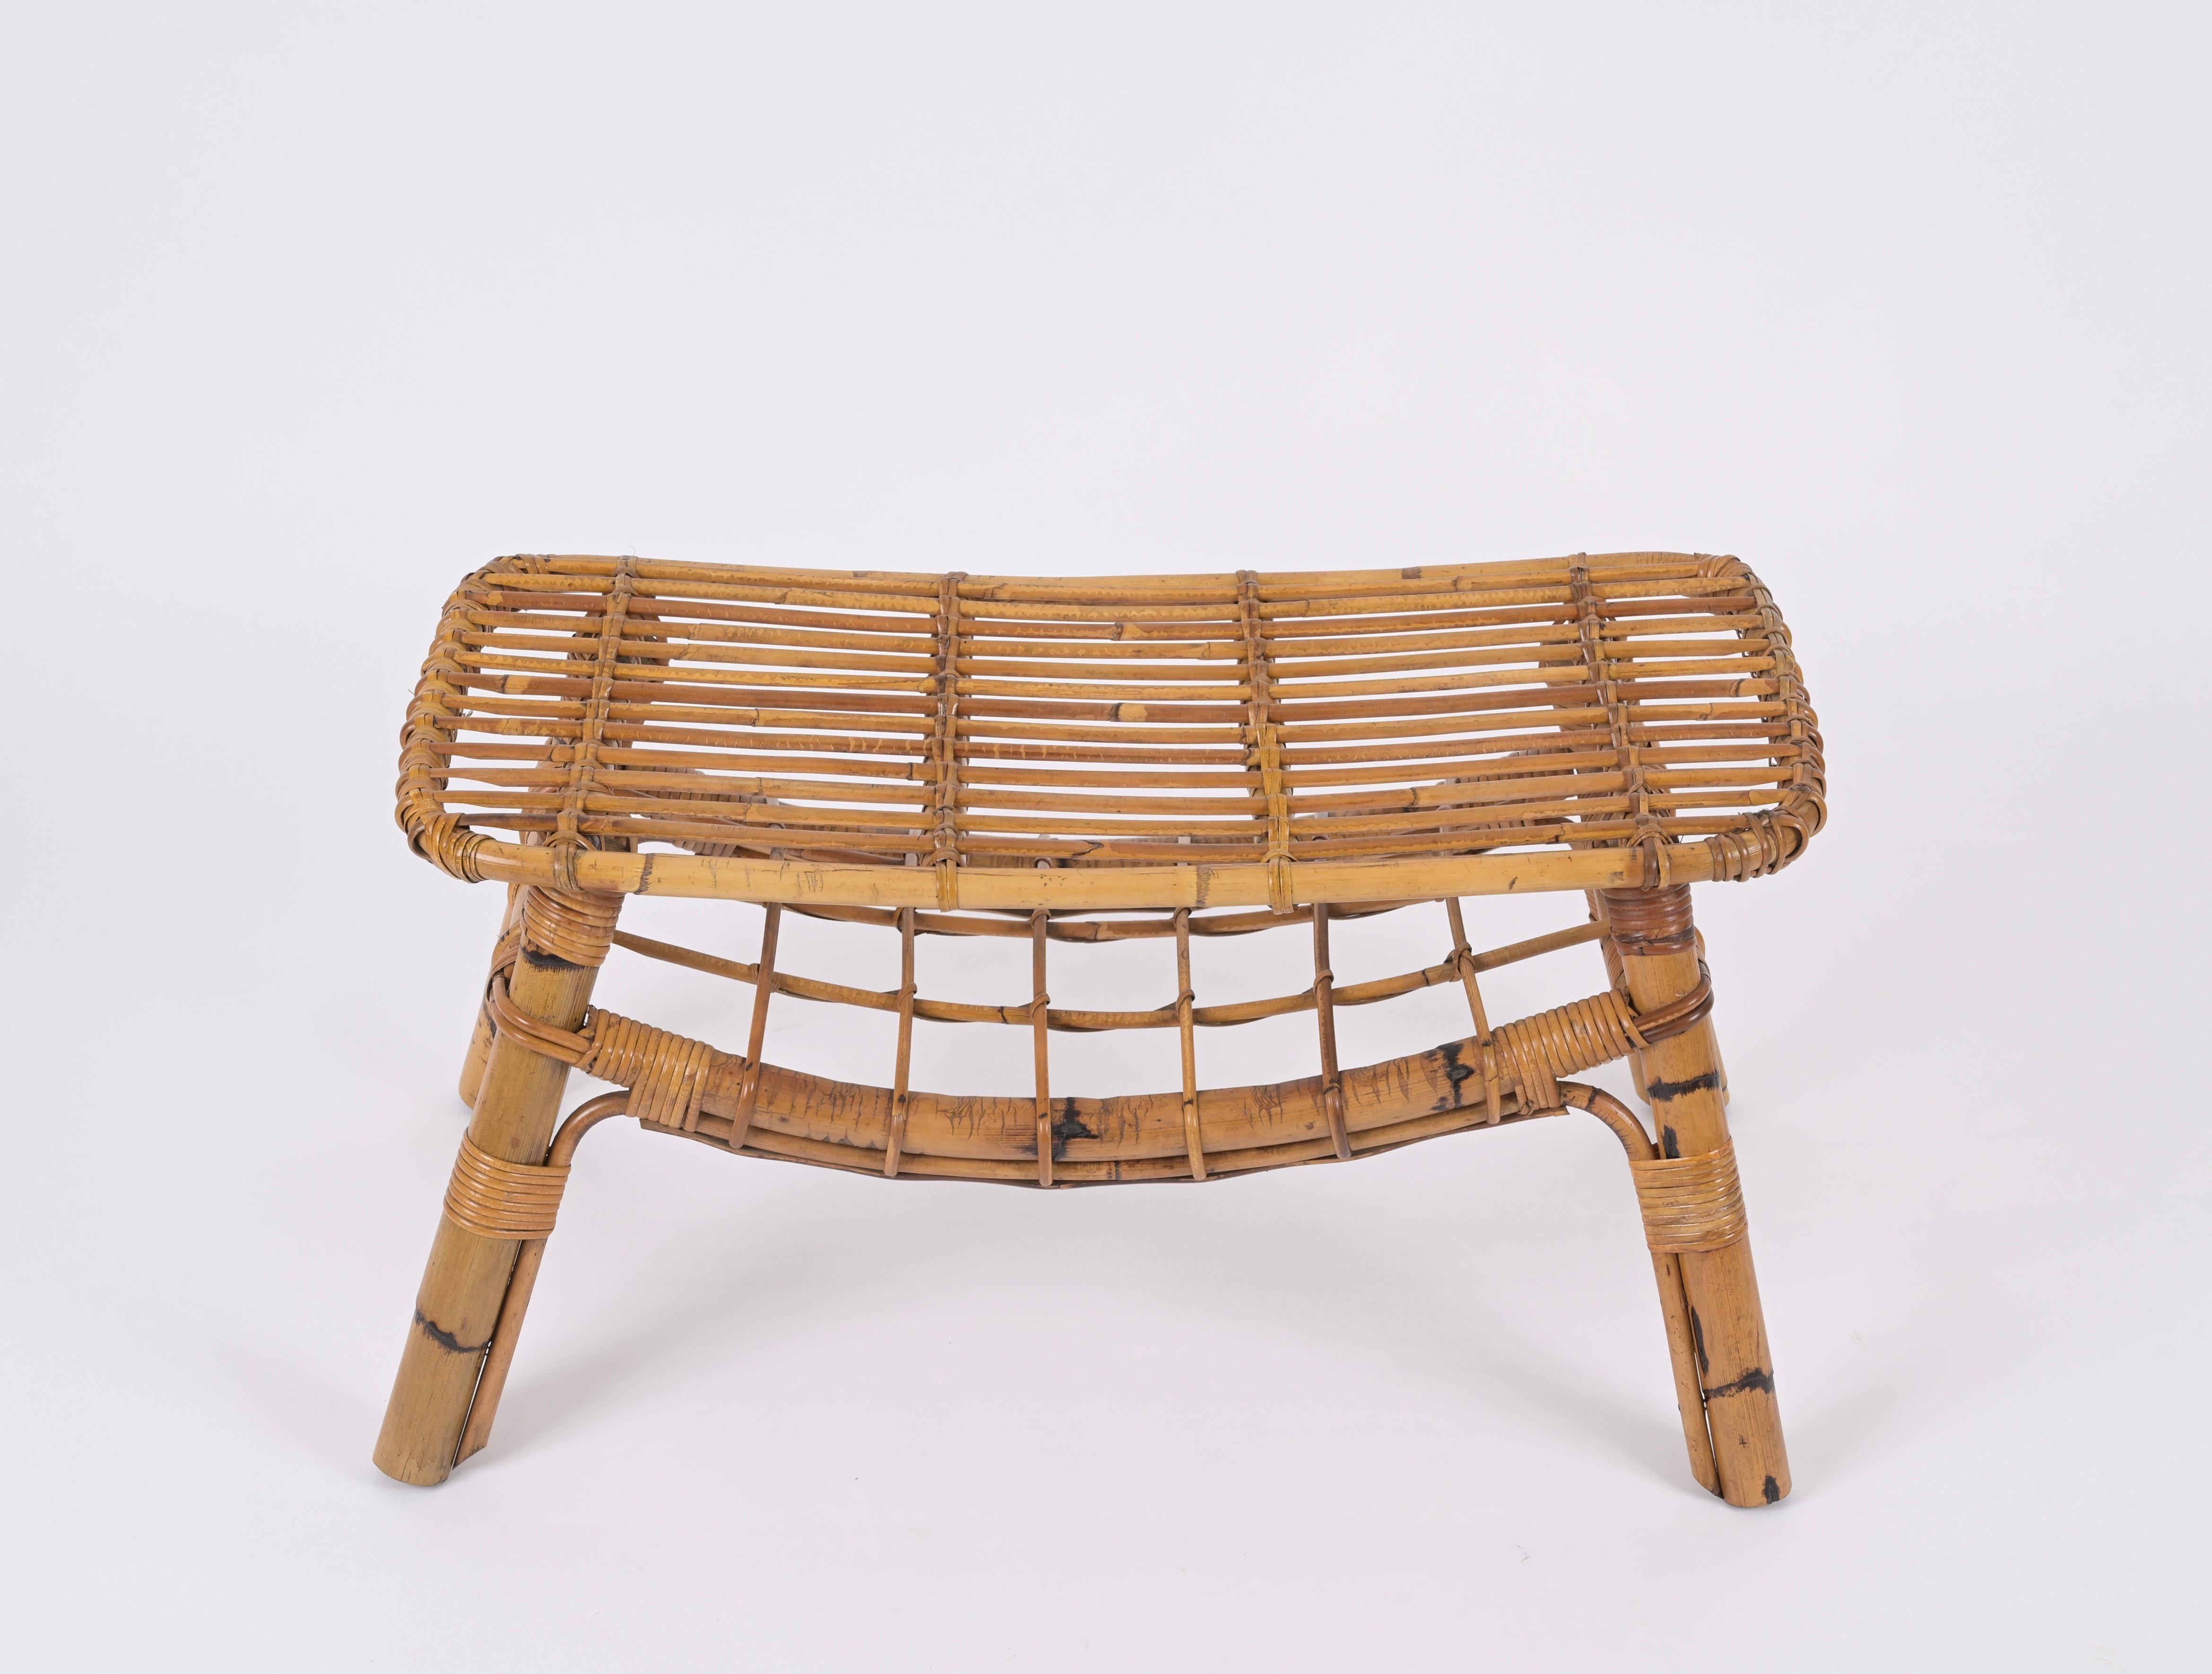 Italian Coffee Table or Bench in Rattan and Wicker by Tito Agnoli, 1960s For Sale 1